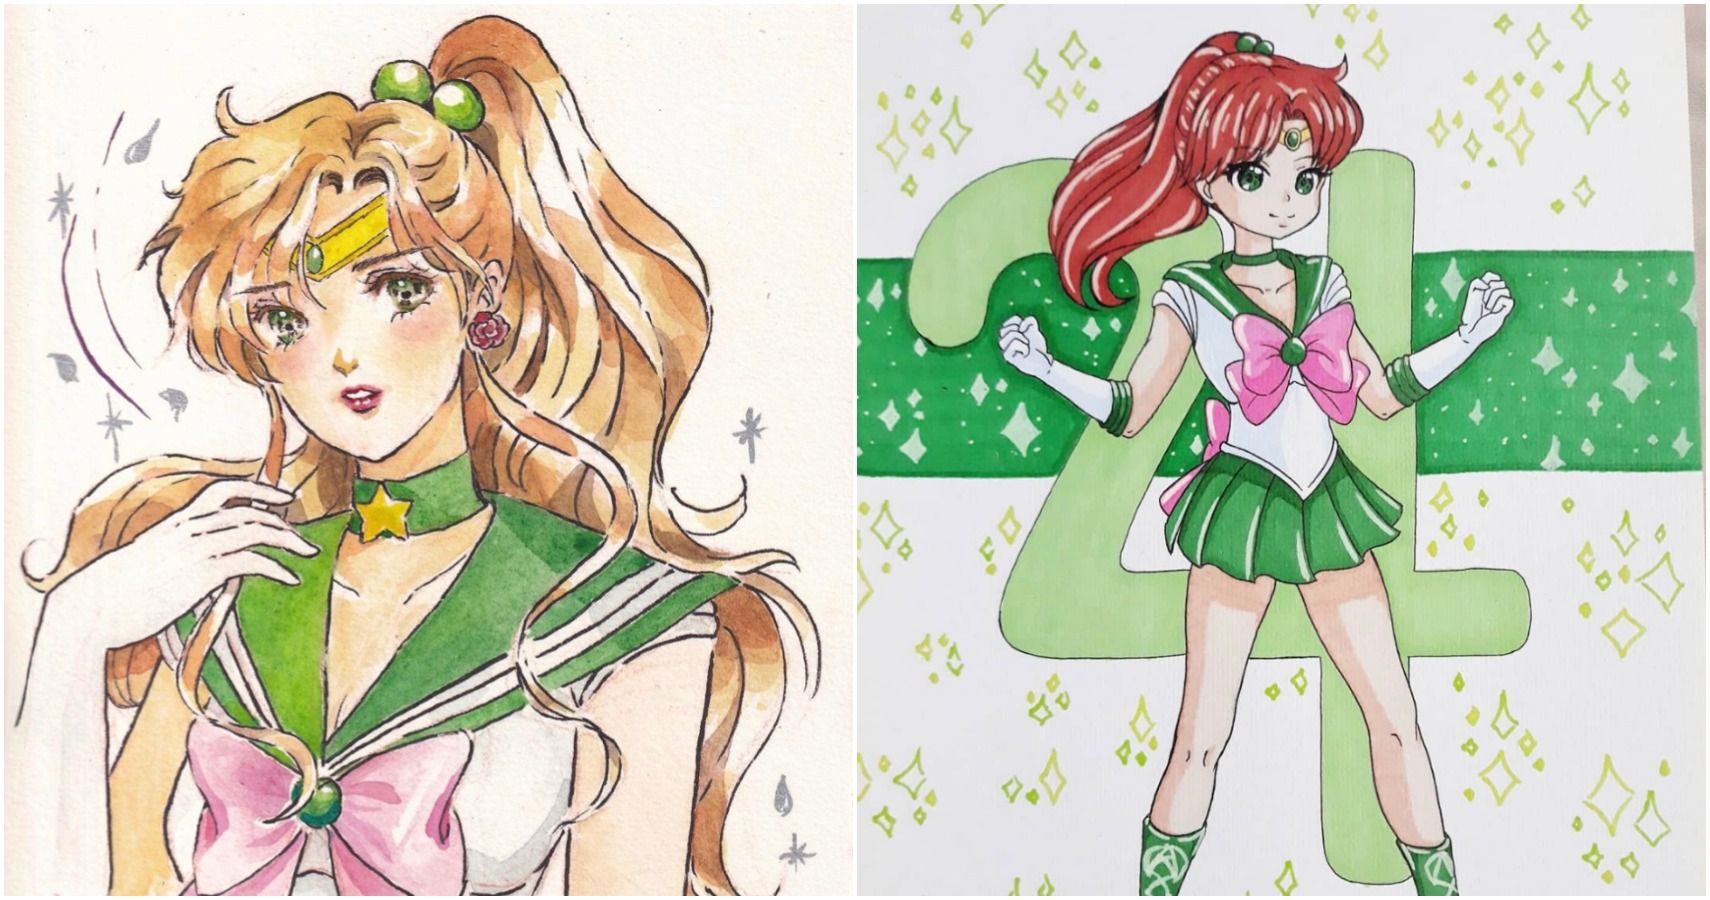 Sailor Moon 10 Sailor Jupiter Fan Art Pictures You Have To See.